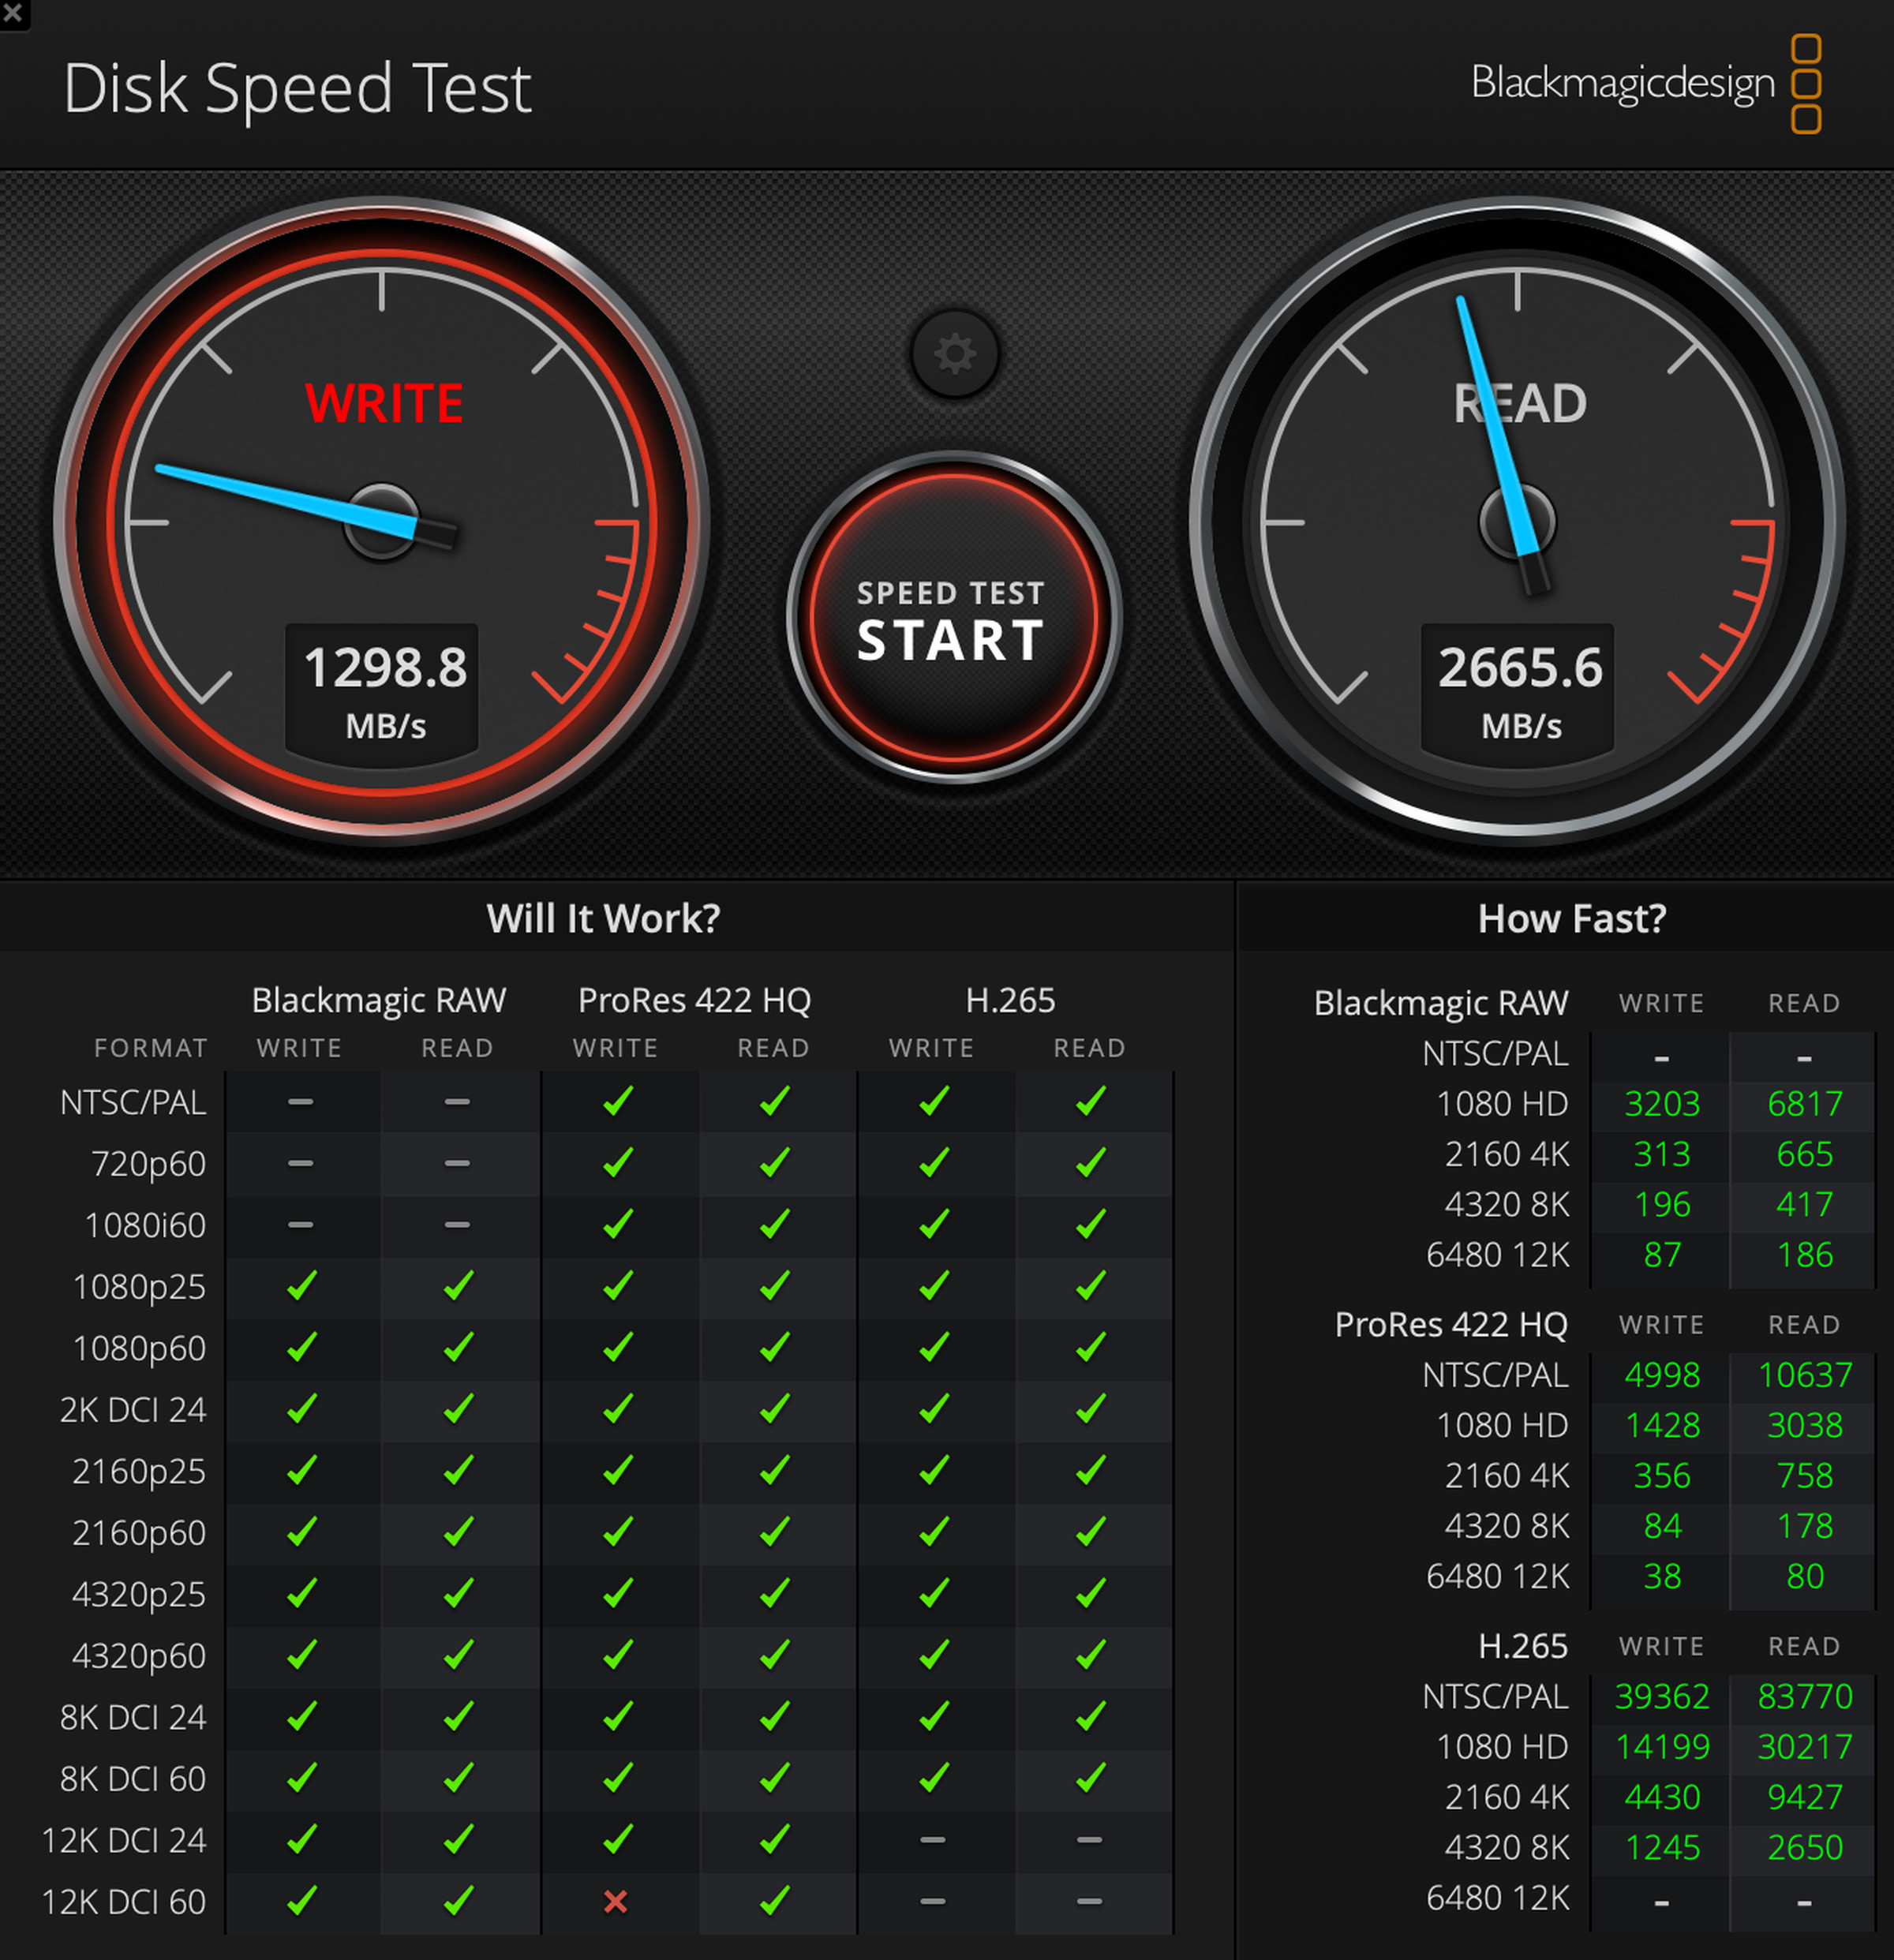 A screenshot of Blackmagic Disk Speed Test indicating scores of 1298.8 for Write and 2665.6 for Read.